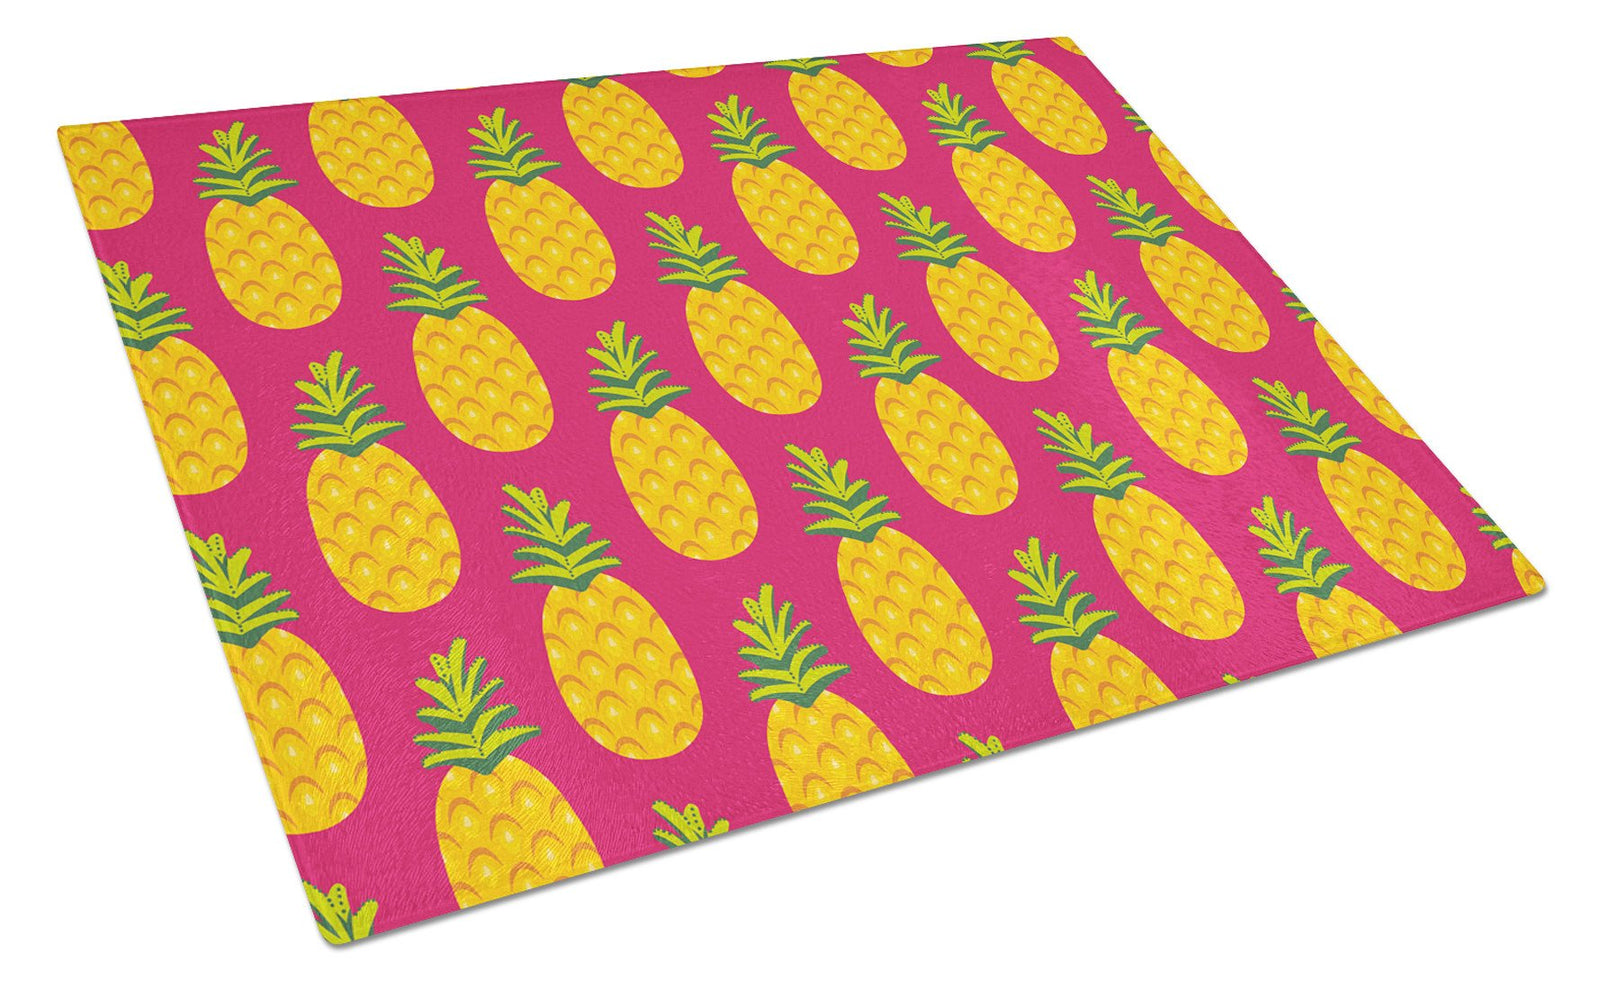 Pineapples on Pink Glass Cutting Board Large BB5136LCB by Caroline's Treasures